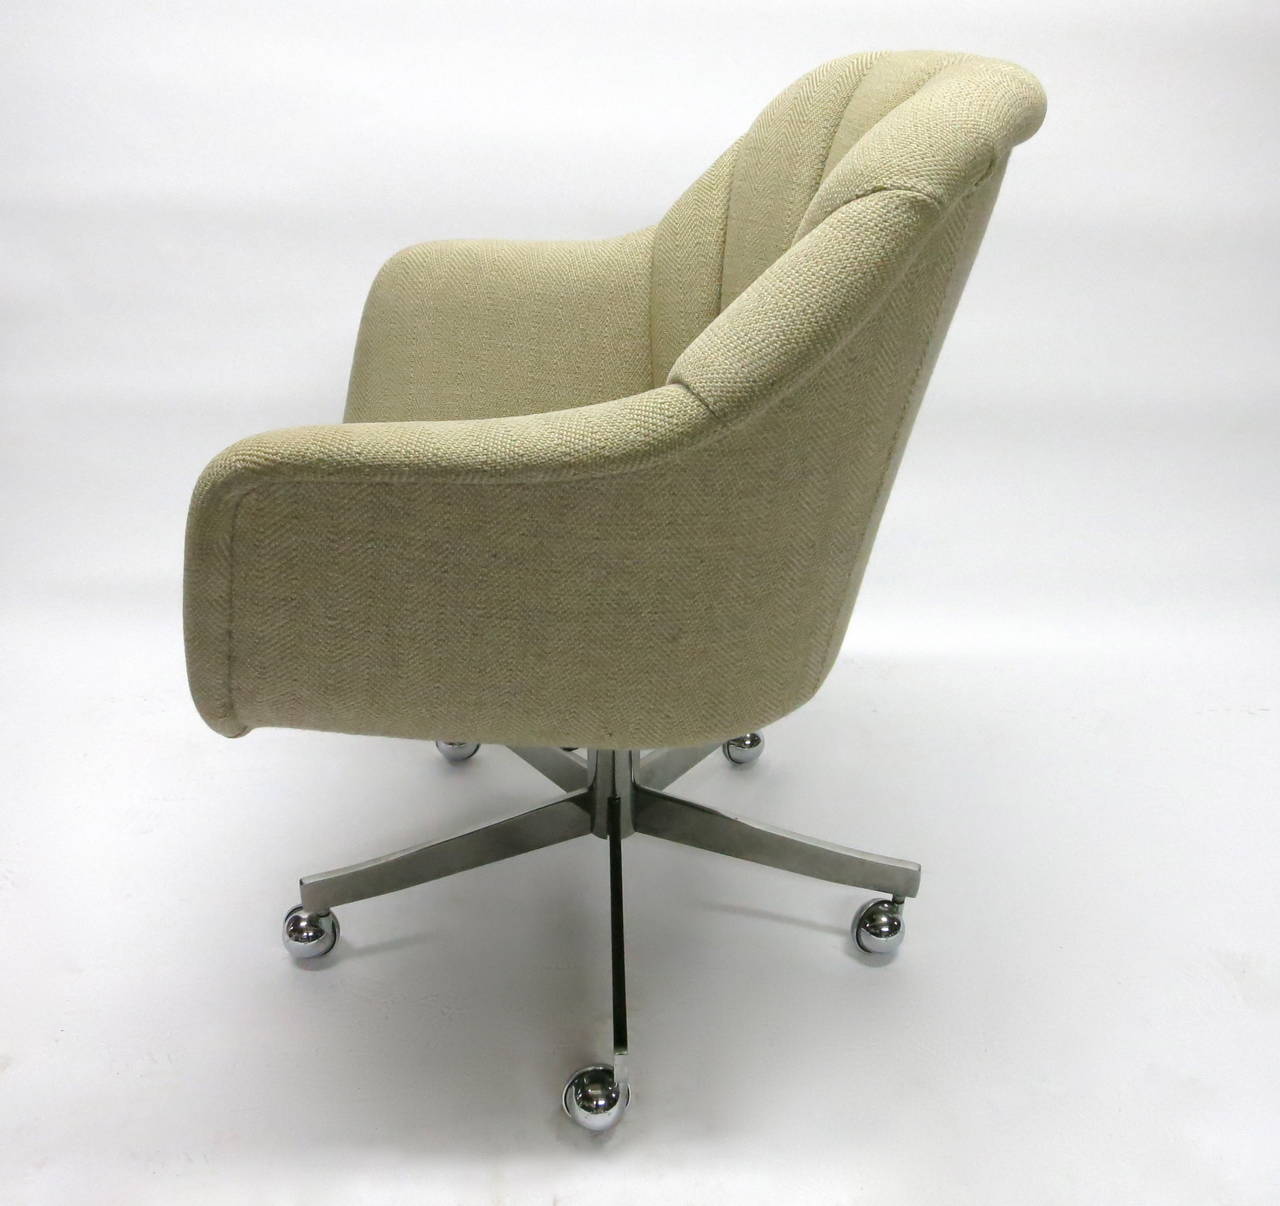 20th Century Single Swivel Desk Chair by Ward Bennett for Brickell, 1984 Made in USA